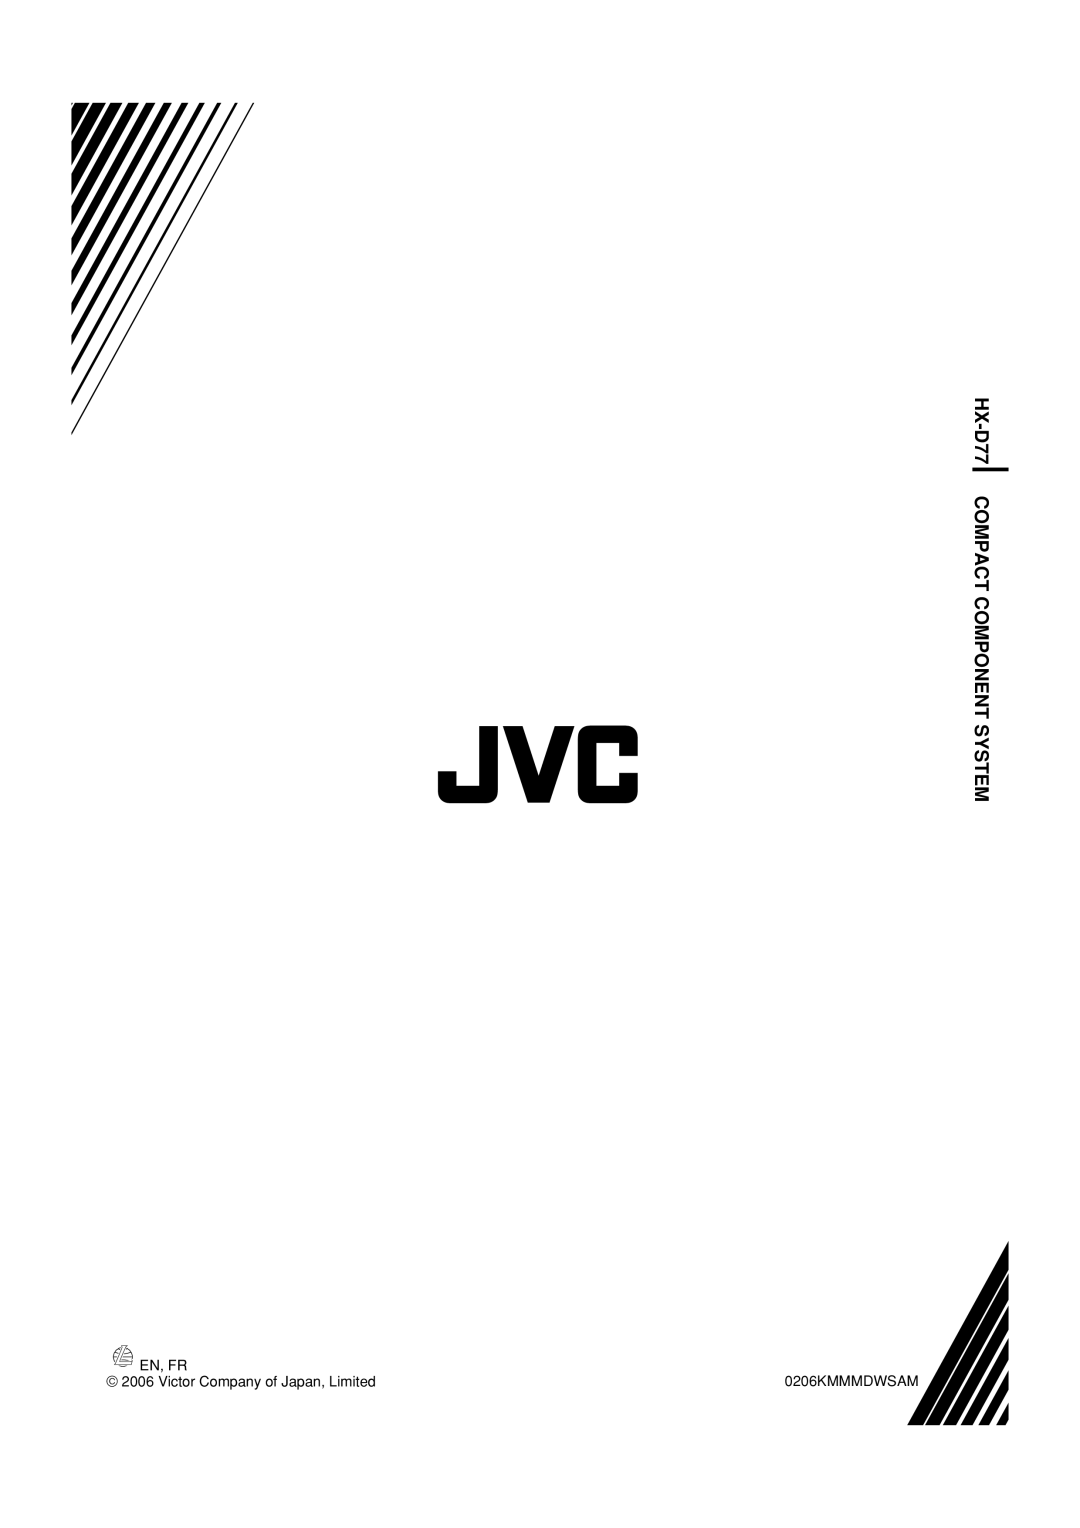 JVC manual HX-D77COMPACT COMPONENT SYSTEM, En, Fr, 0206KMMMDWSAM, Victor Company of Japan, Limited 